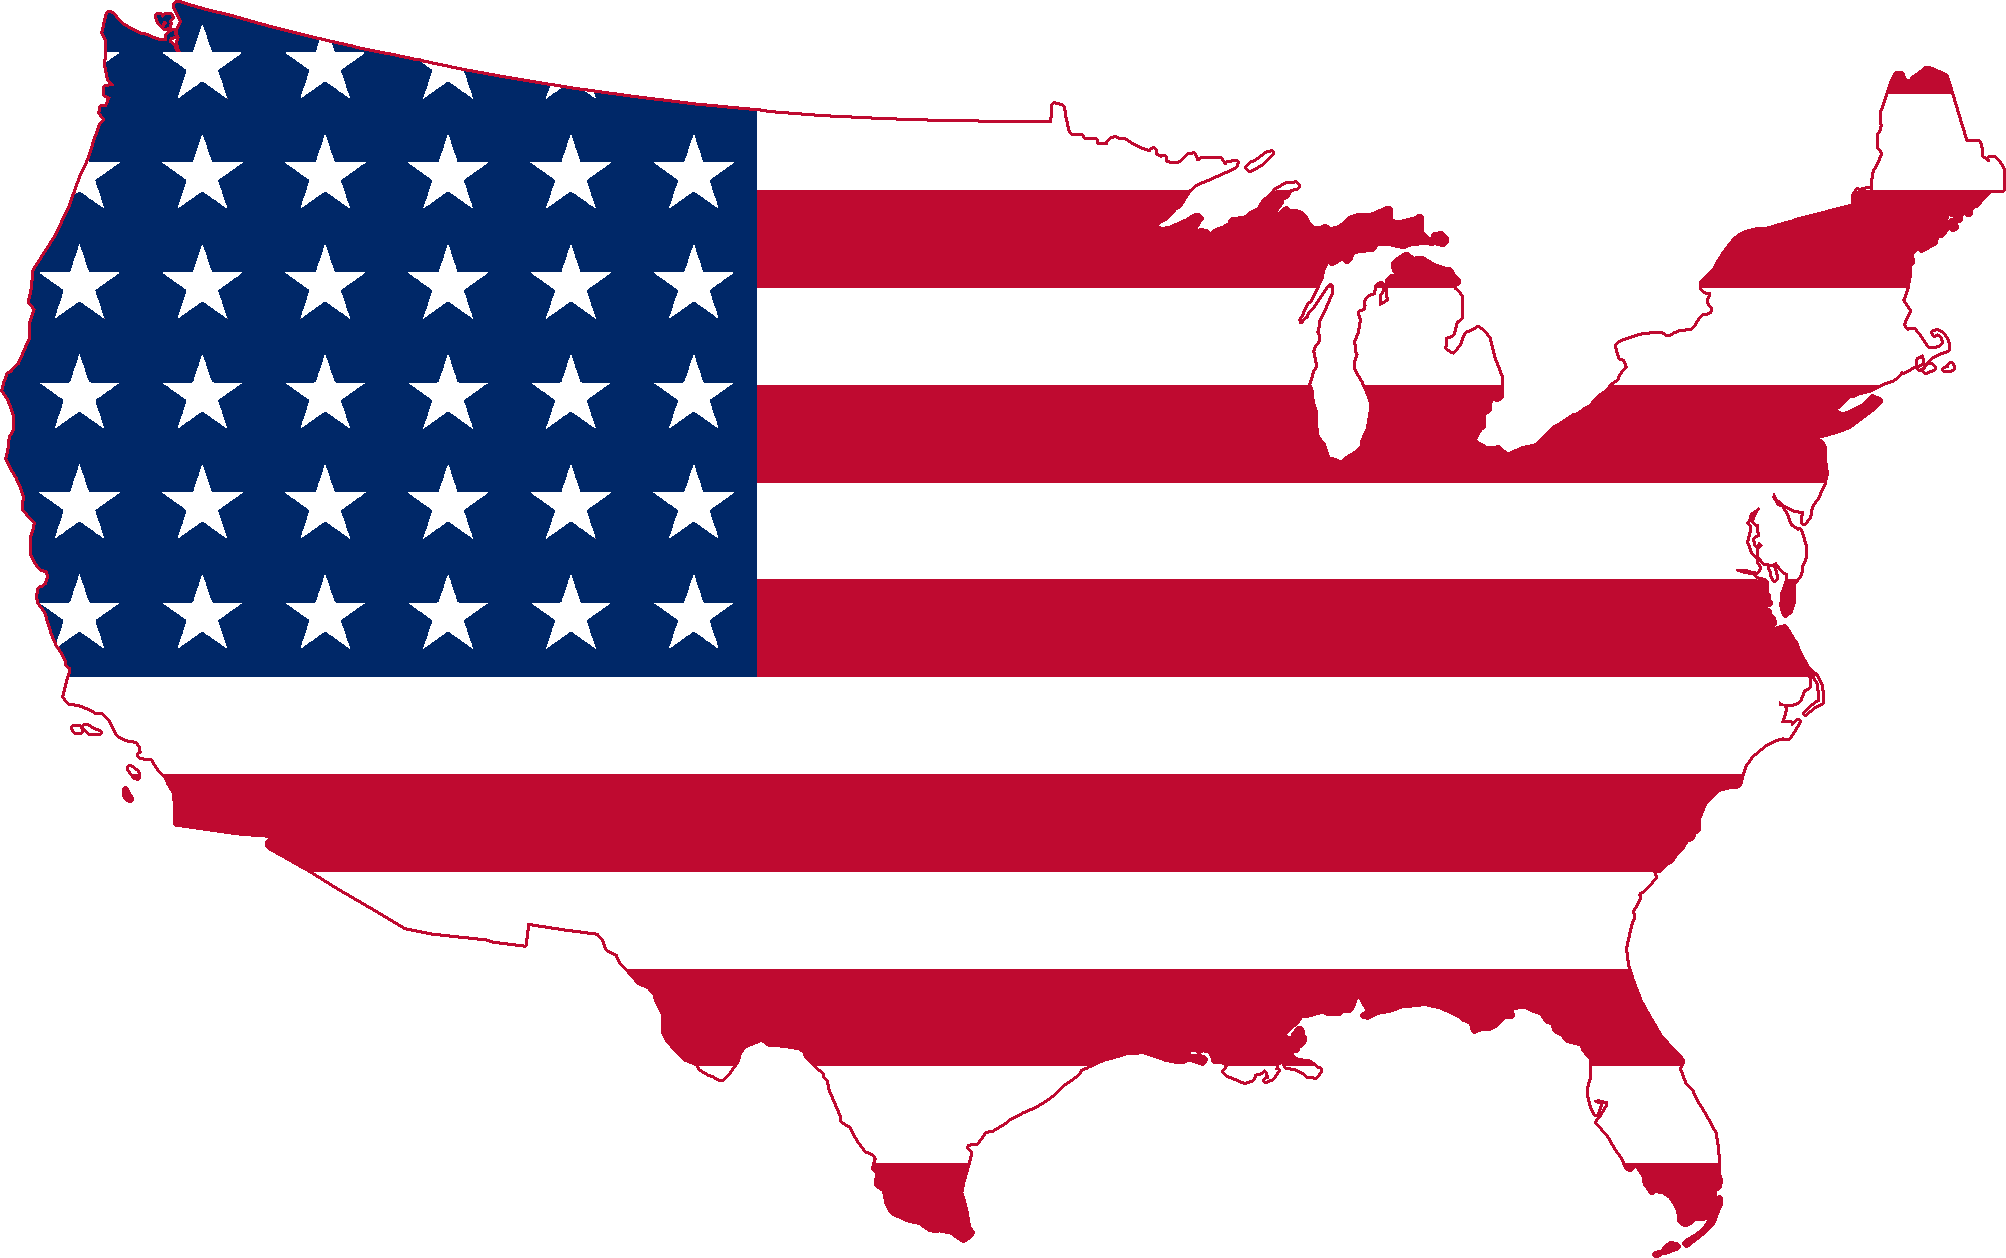 America Blank Template - Imgflip Inside Blank Template Of The United States